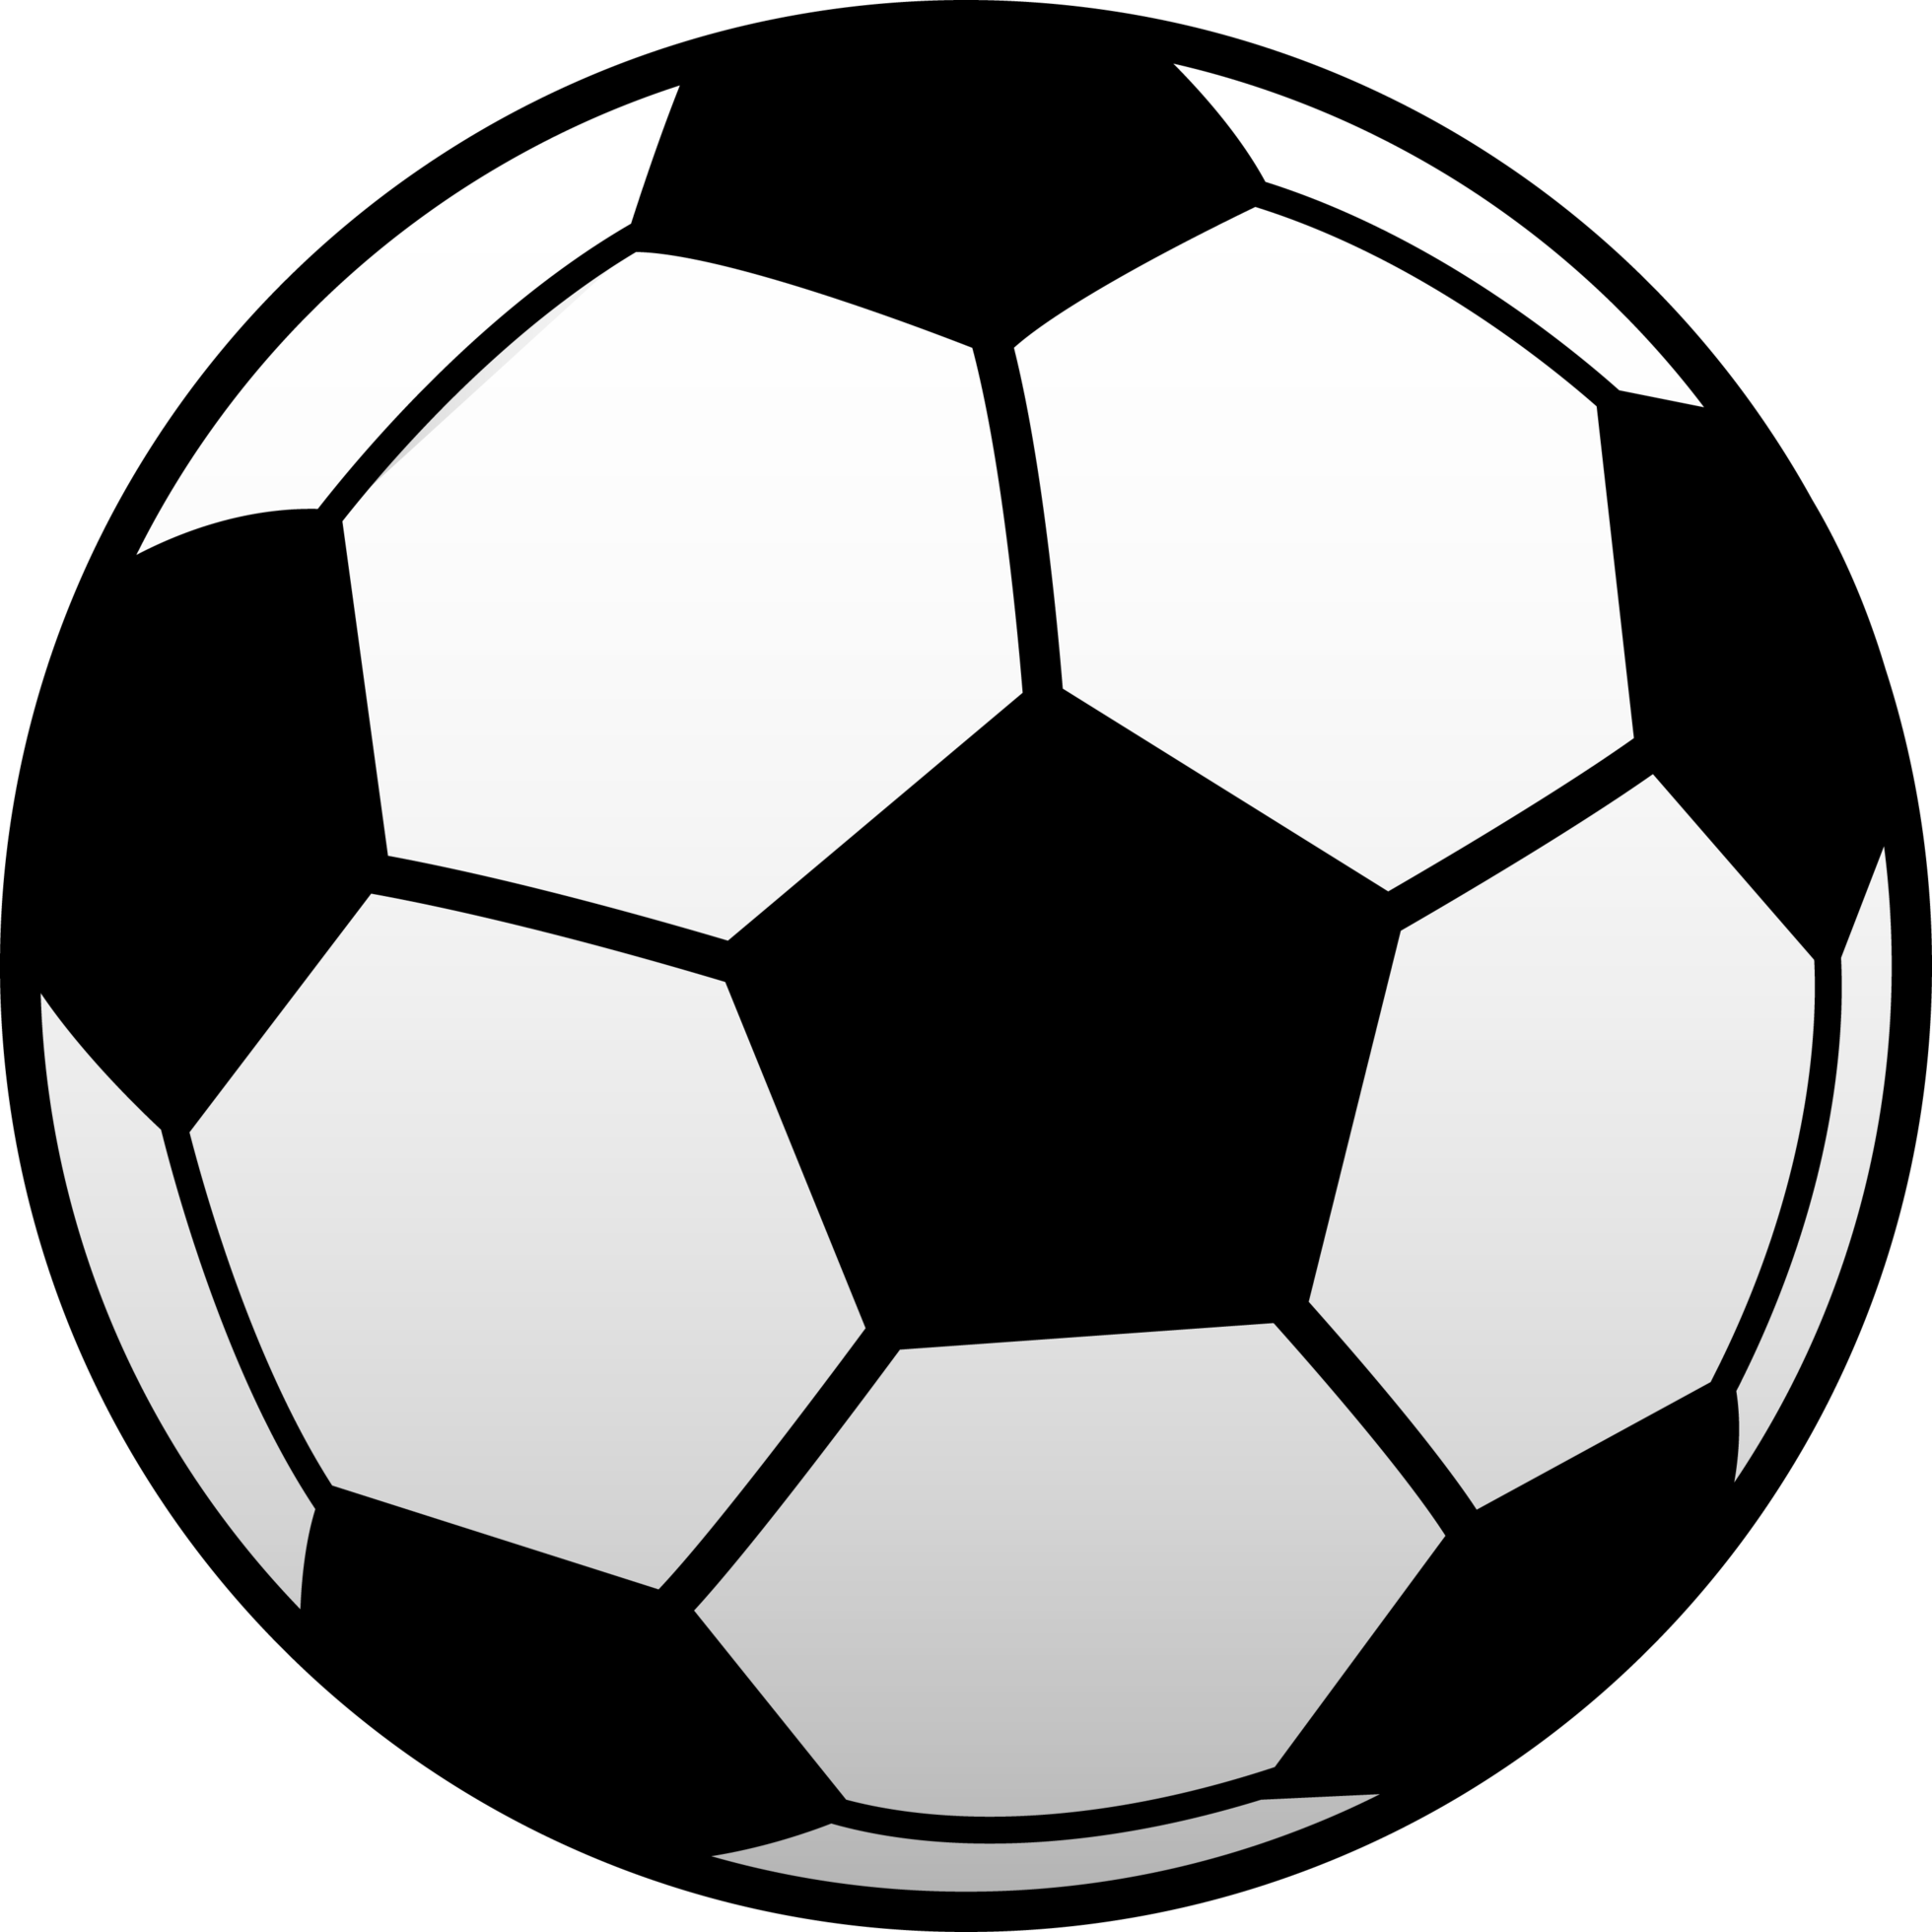 Cartoon Pictures Of Soccer Balls